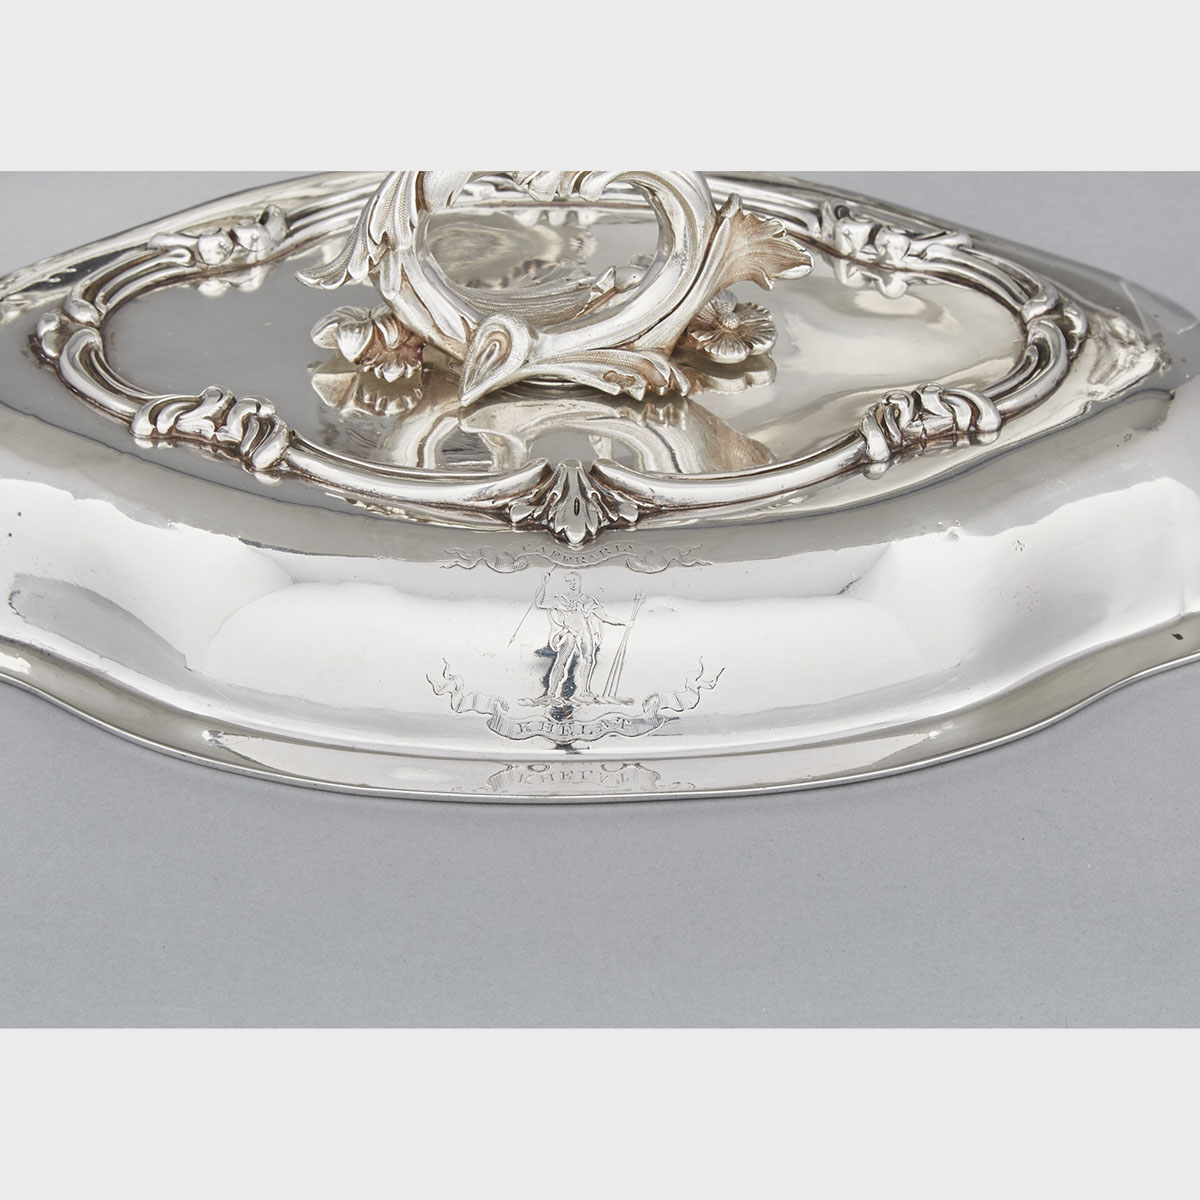 Pair of Early Victorian Silver Covered Entrée Dishes with Old Sheffield Plate Warming Stands, William Ker Reid, London, 1837